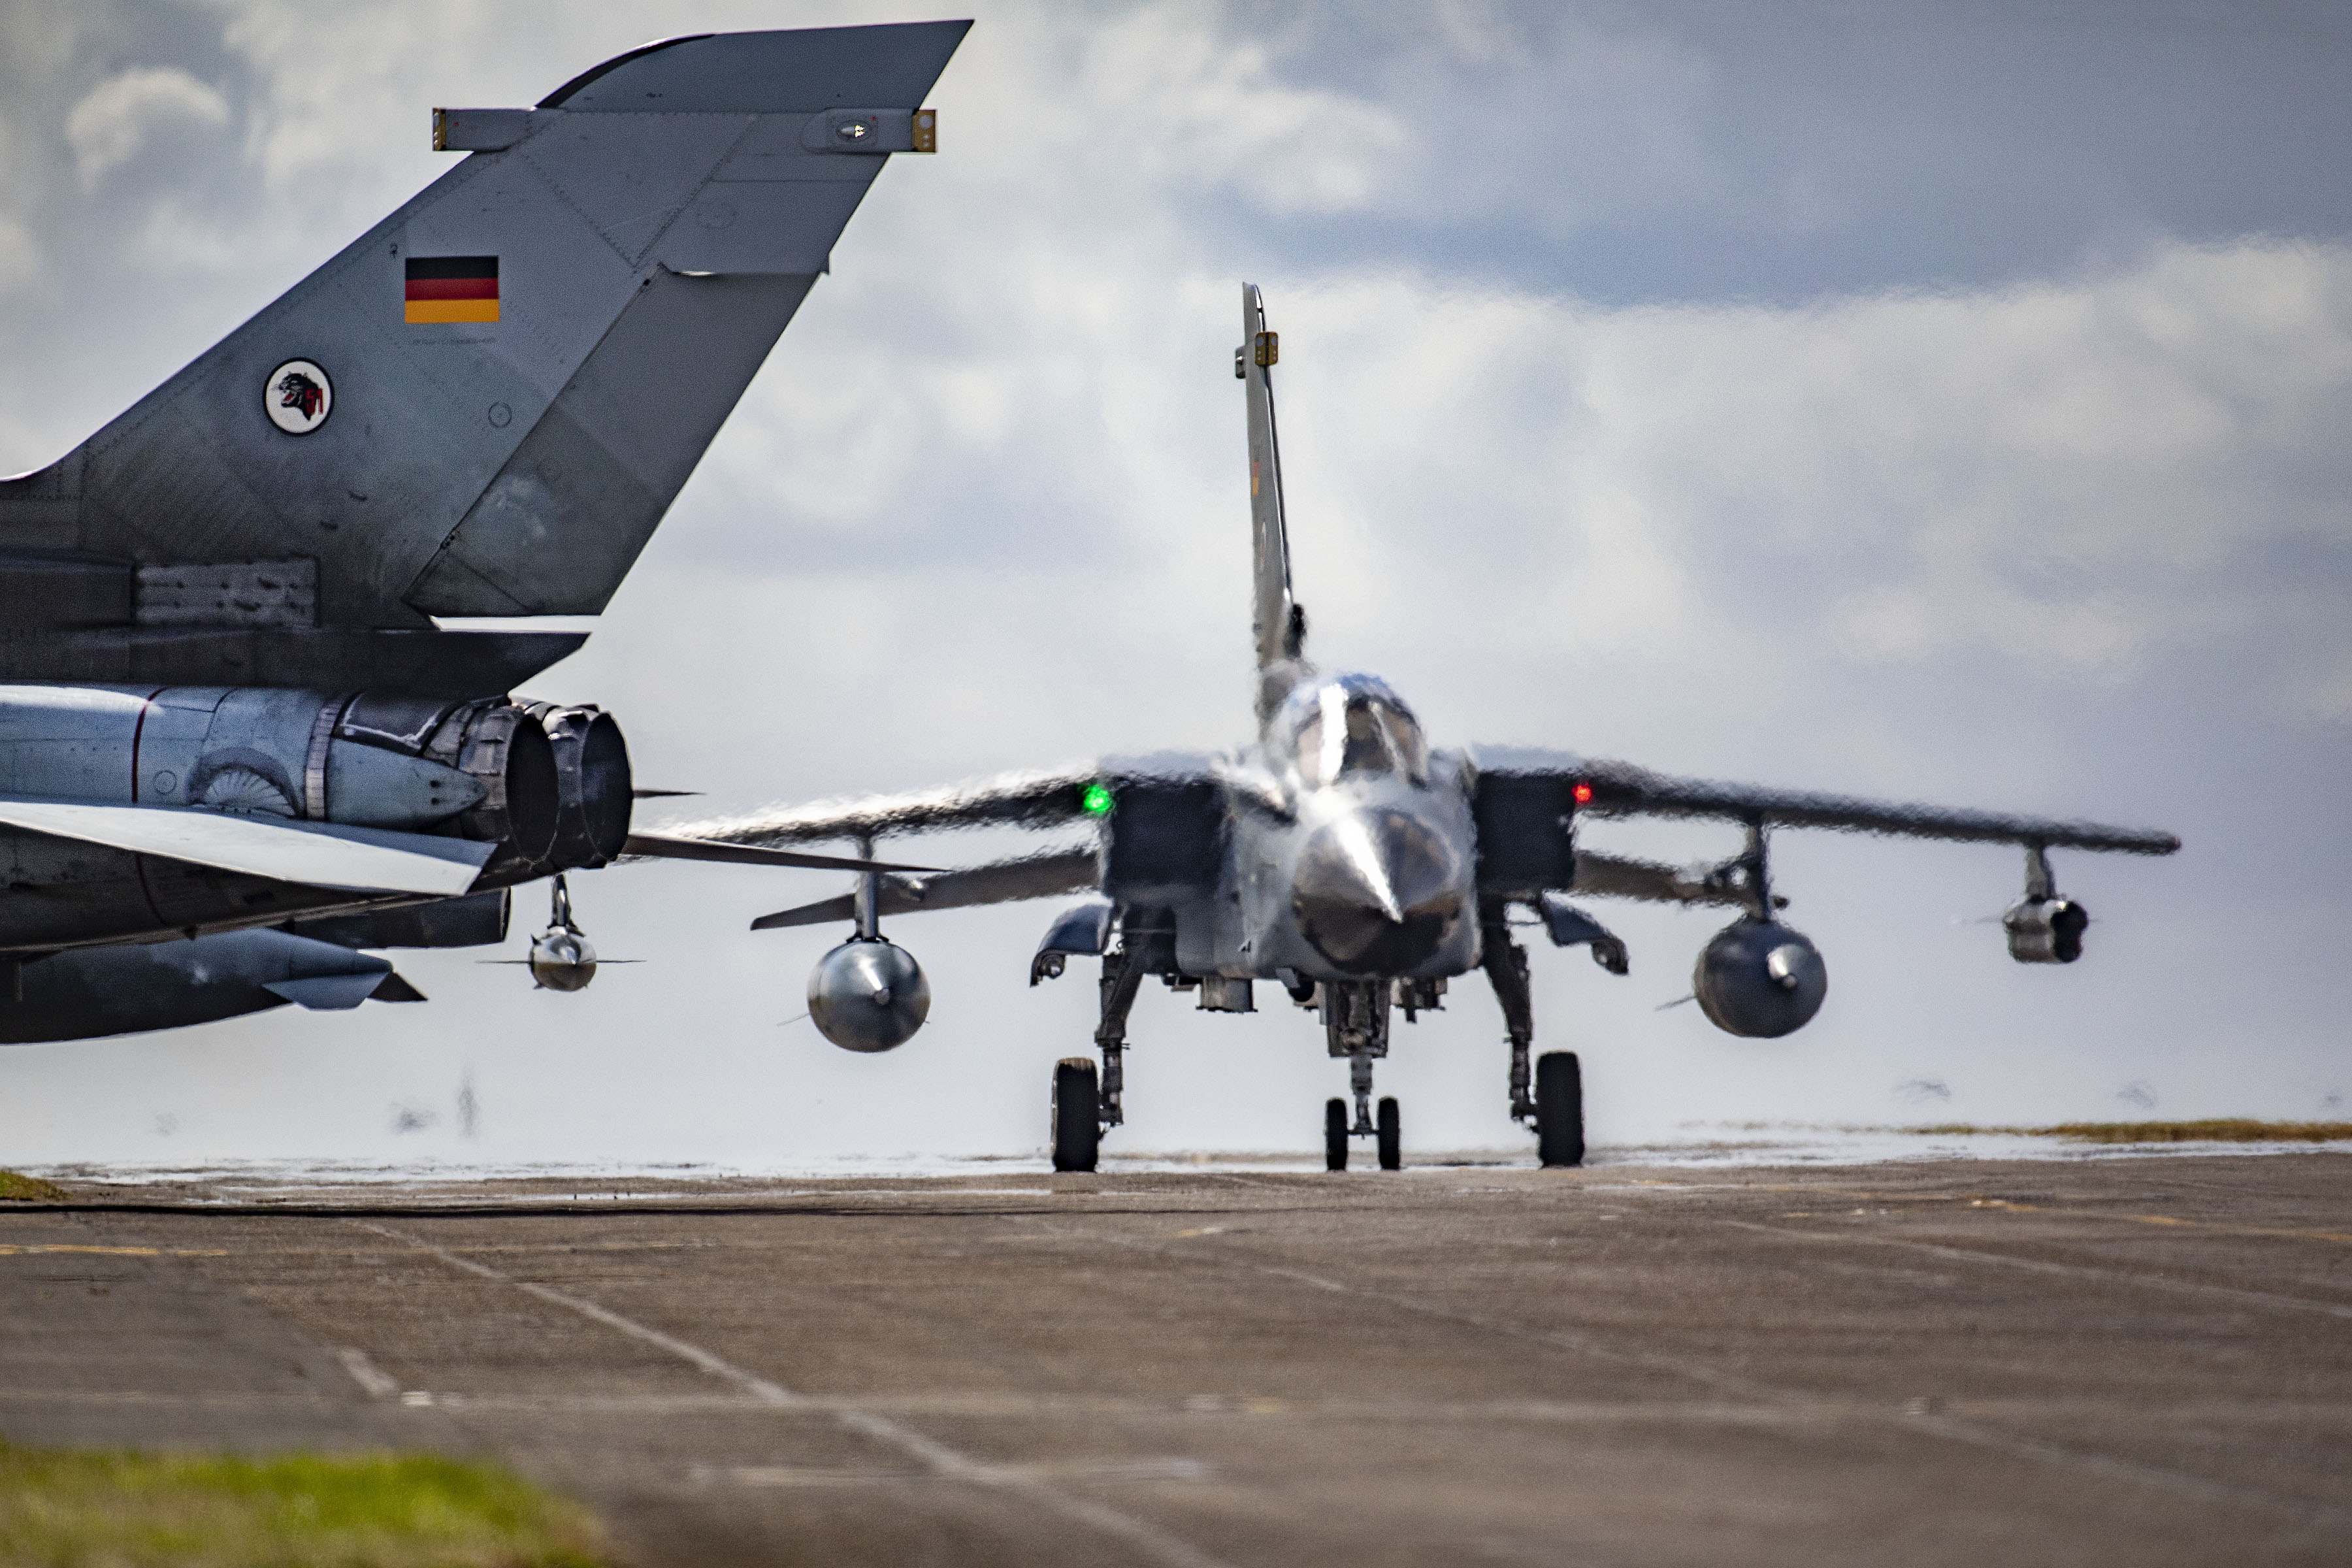 Image shows fighter jets on the runway.